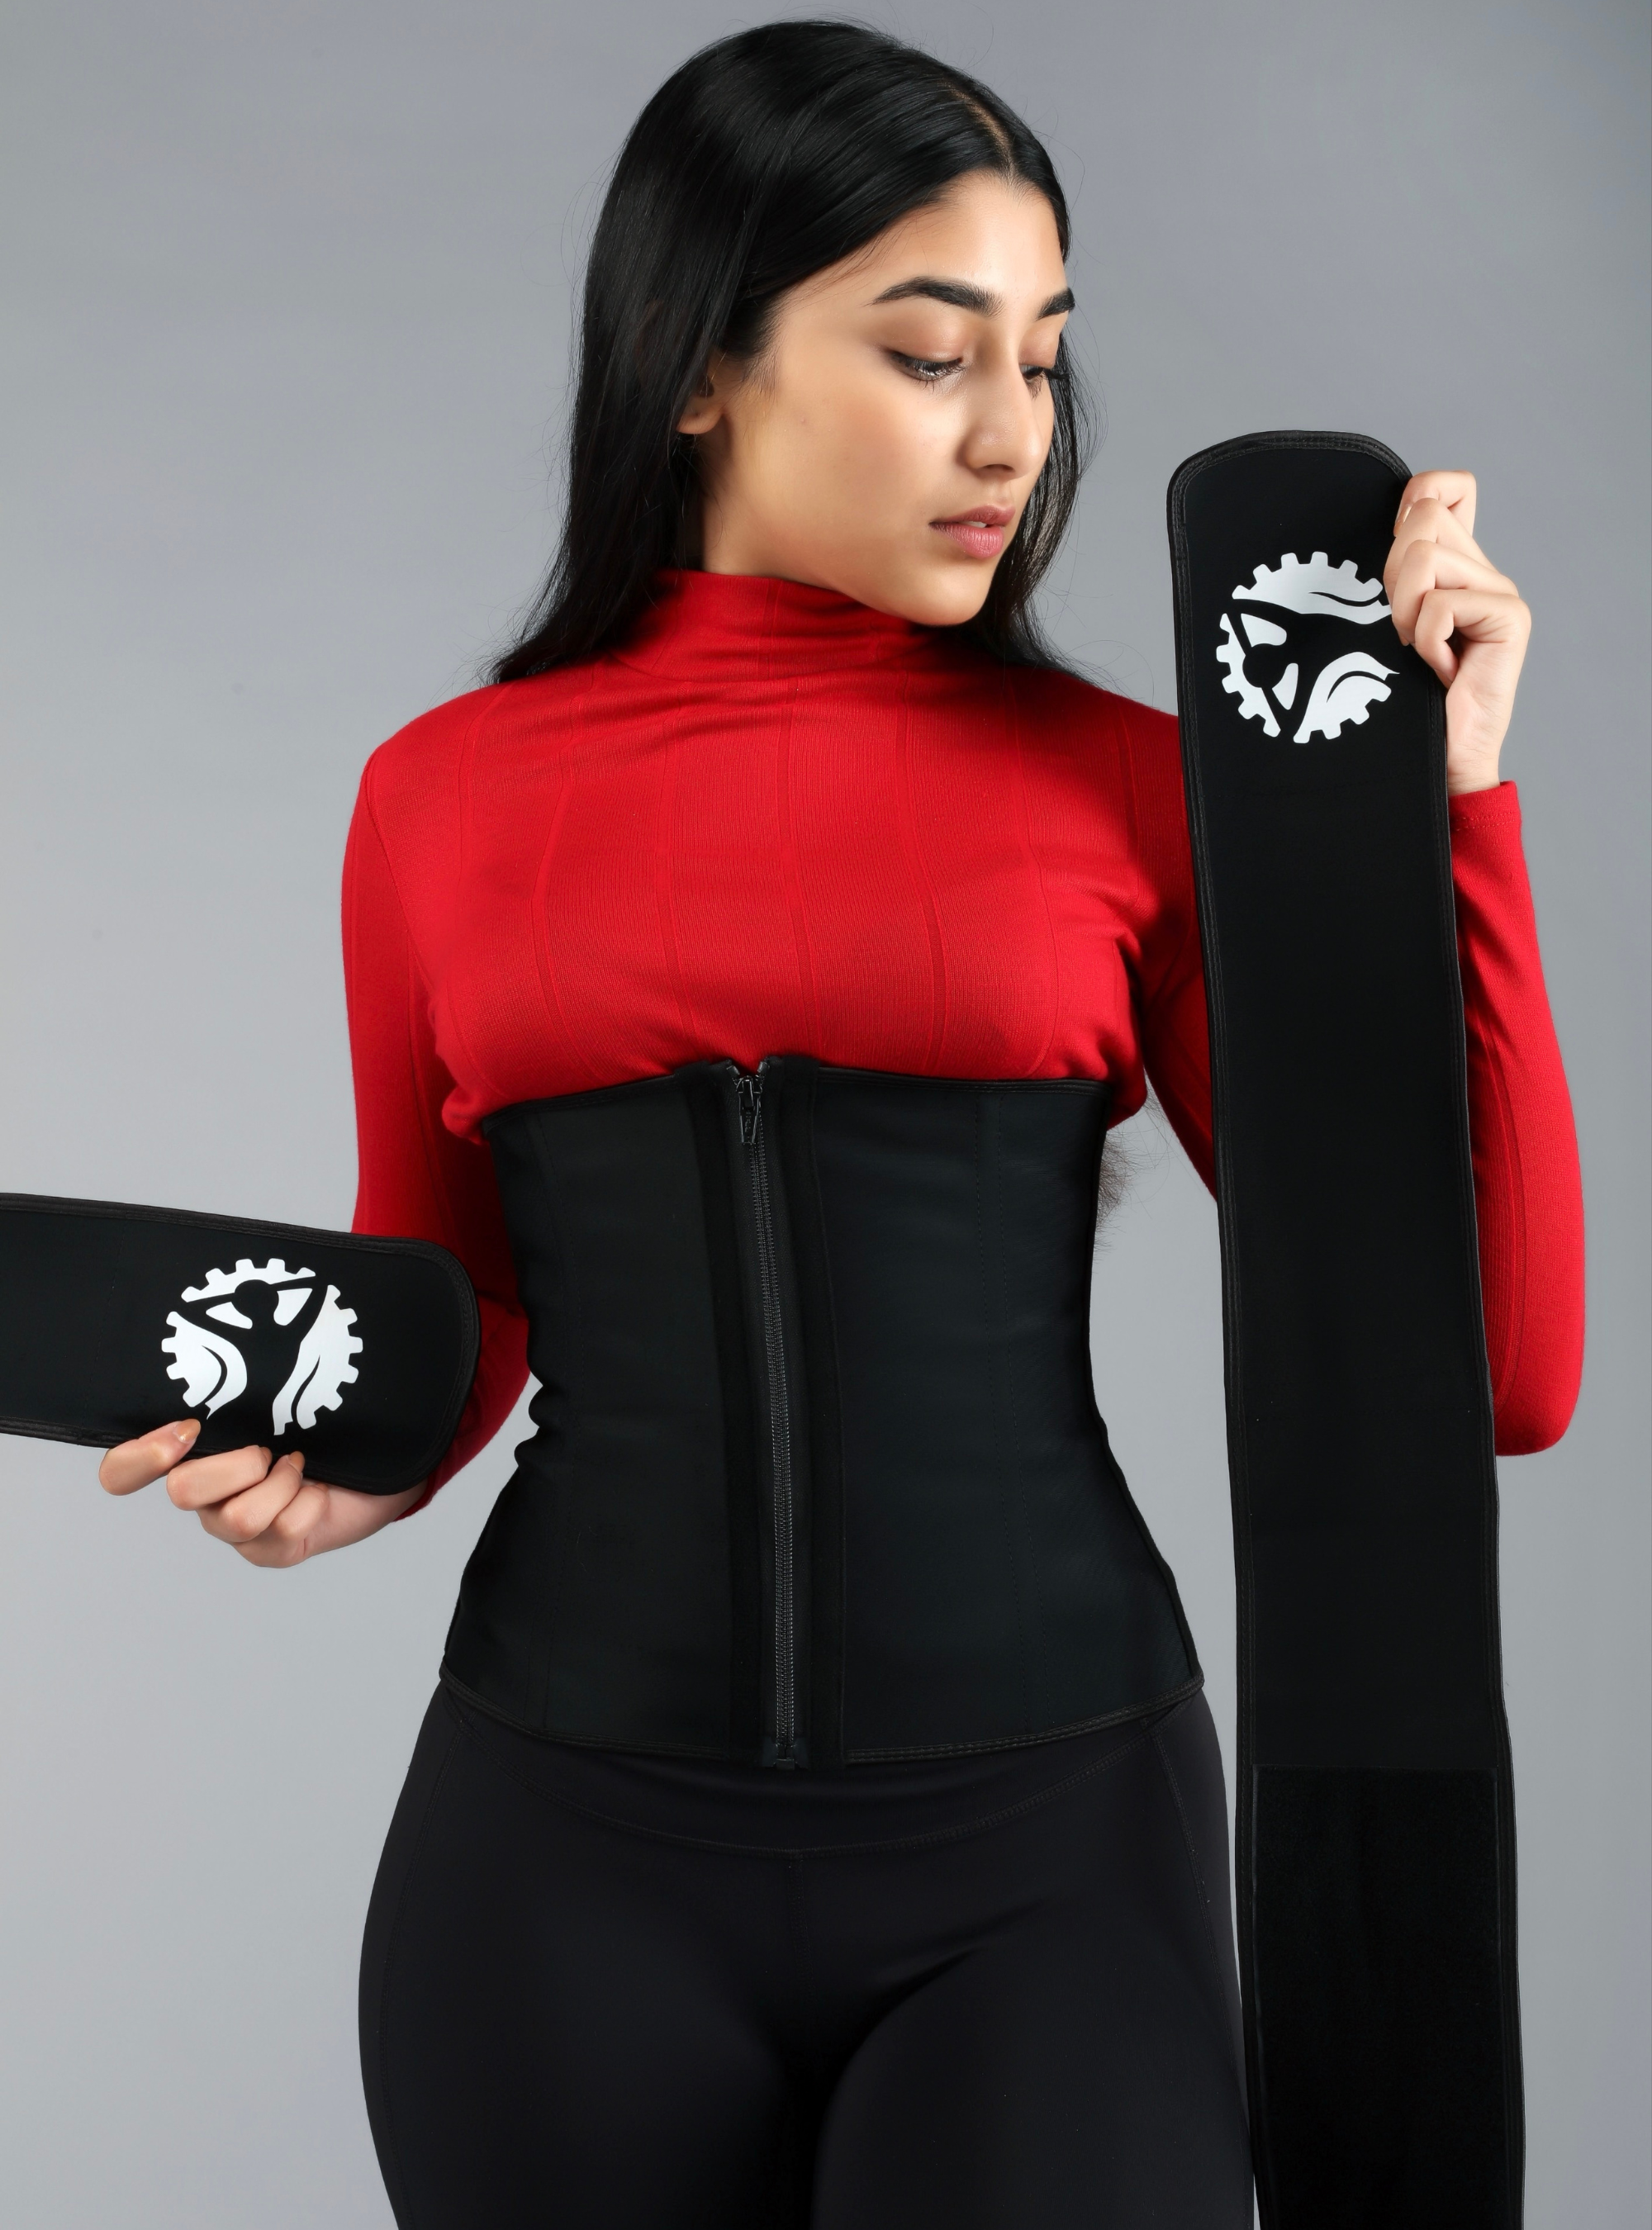 Double Waistband – Queens Fitness